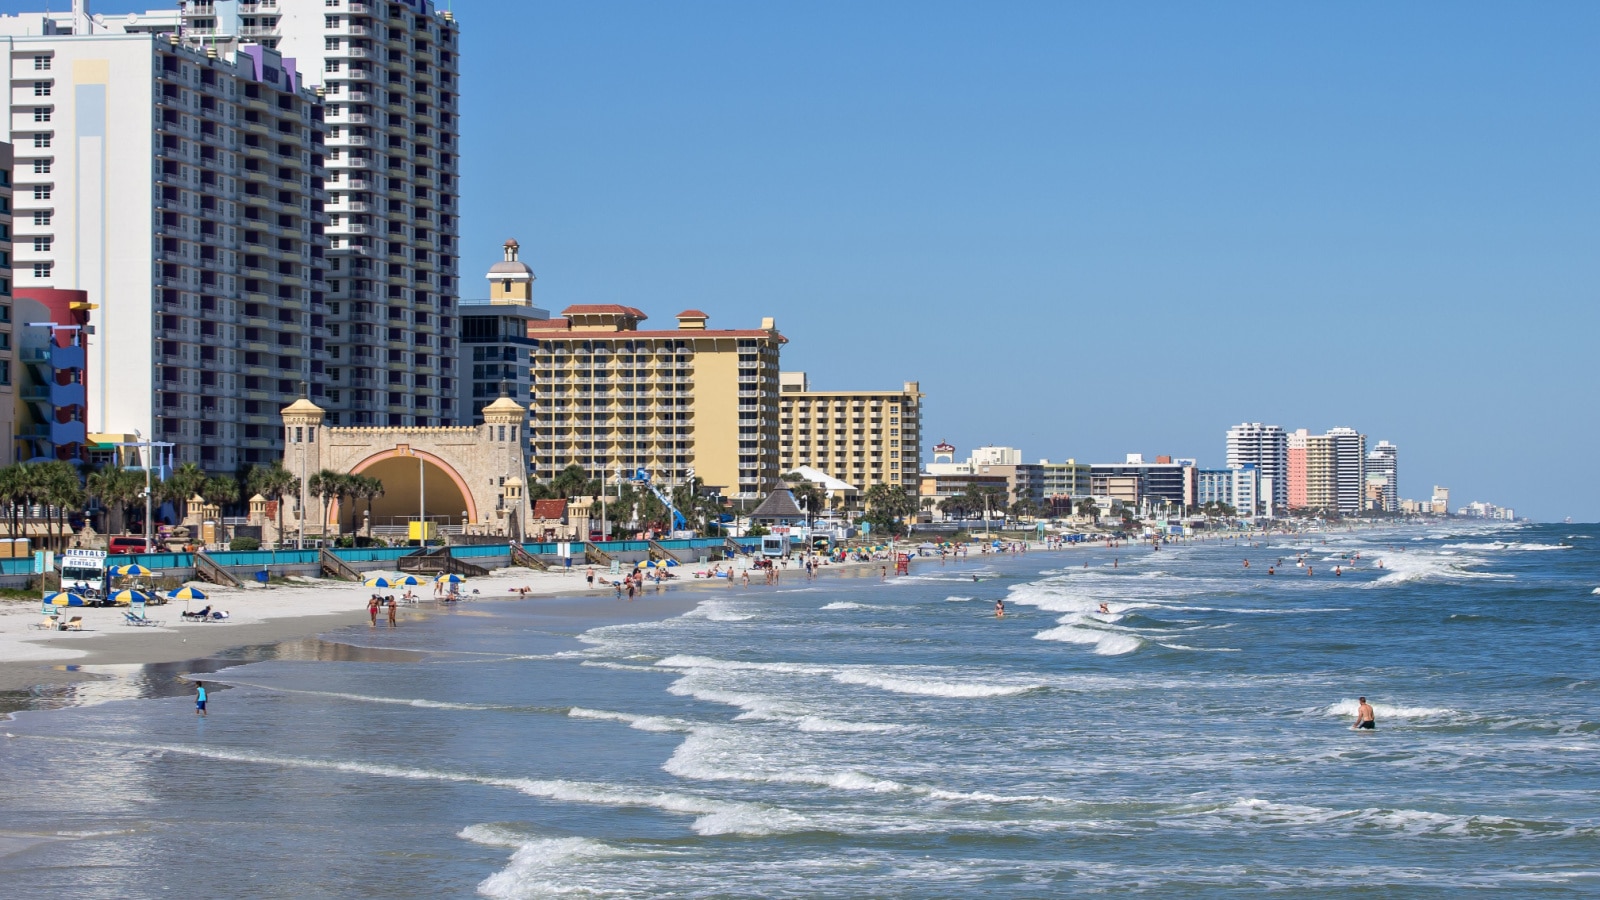 <p>Daytona Beach, Florida, is a tourist destination. But visiting this city as a vacation place may not be everyone’s cup of tea. One visitor said, “It’s like a permanent carnival plus some street preachers, people of Walmart, and homeless teens. It also smells like diesel fuel, feet, beer, and cigarettes.”</p>